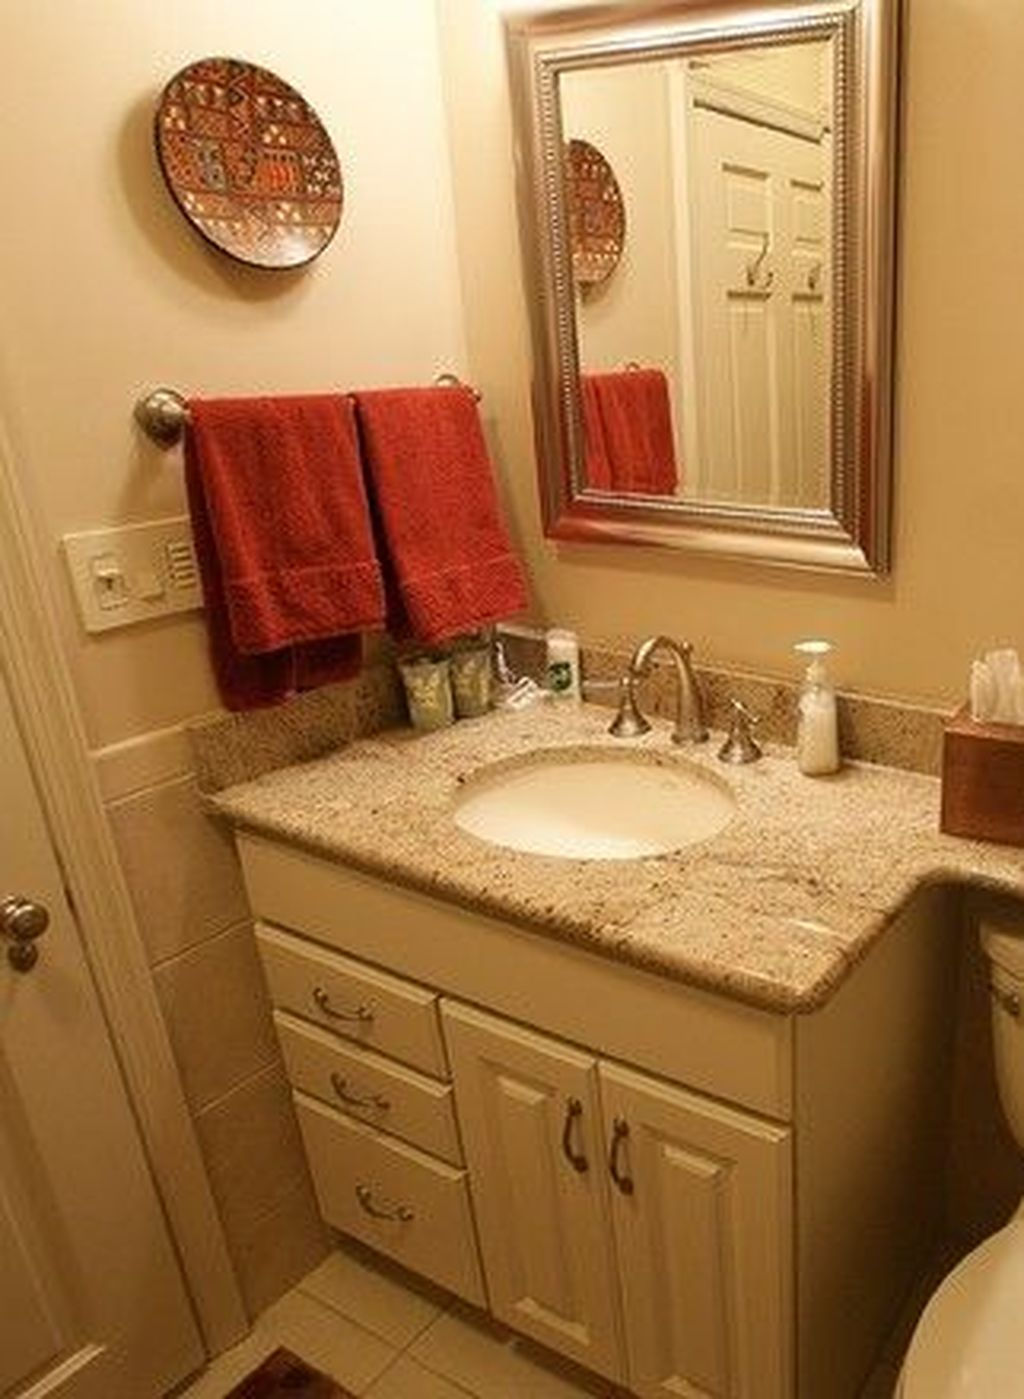 Popular Traditional Small Bathroom Decor Ideas To Try Asap 04